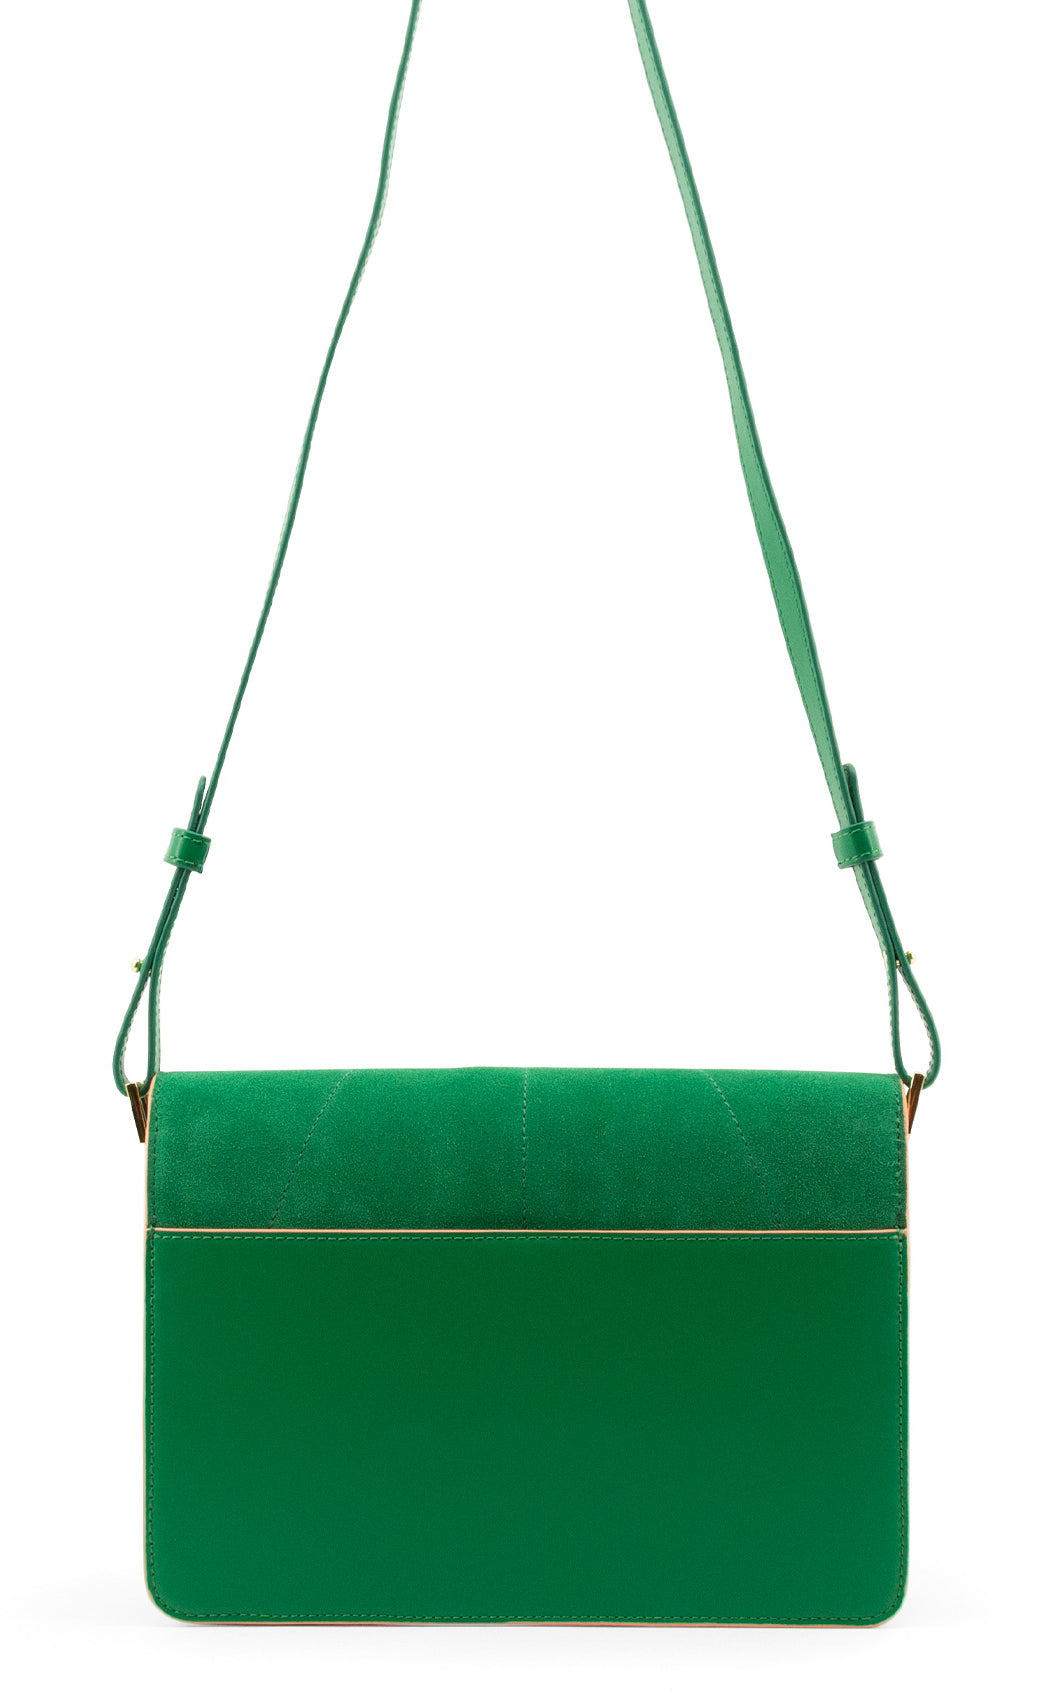 Colourful Handbags Webshop I Timeless or Funky but Practical